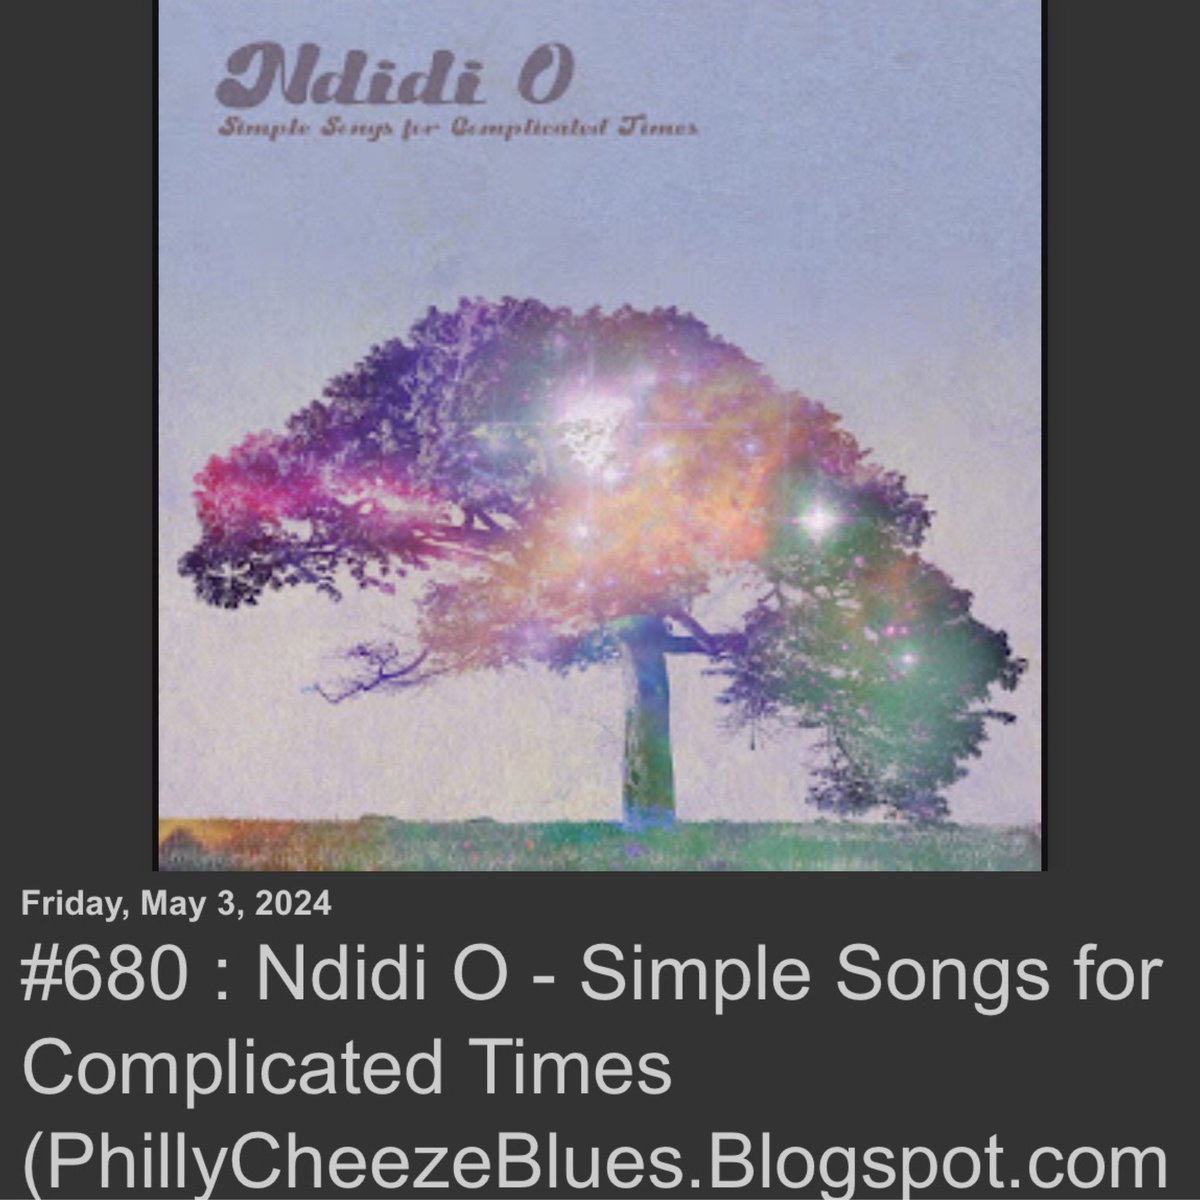 PhillyCheeze’s Rock & Blues Reviews #680 Ndidi O - Simple Songs for Complicated Times 2024 – Black Hen Music 😎🎶🔥🎸 @blackhenmusic phillycheezeblues.blogspot.com/2024/05/680-nd… #ndidio #canadianblues #blues #bluesmusic #roots #rootsmusic #musicblog #bluesblog